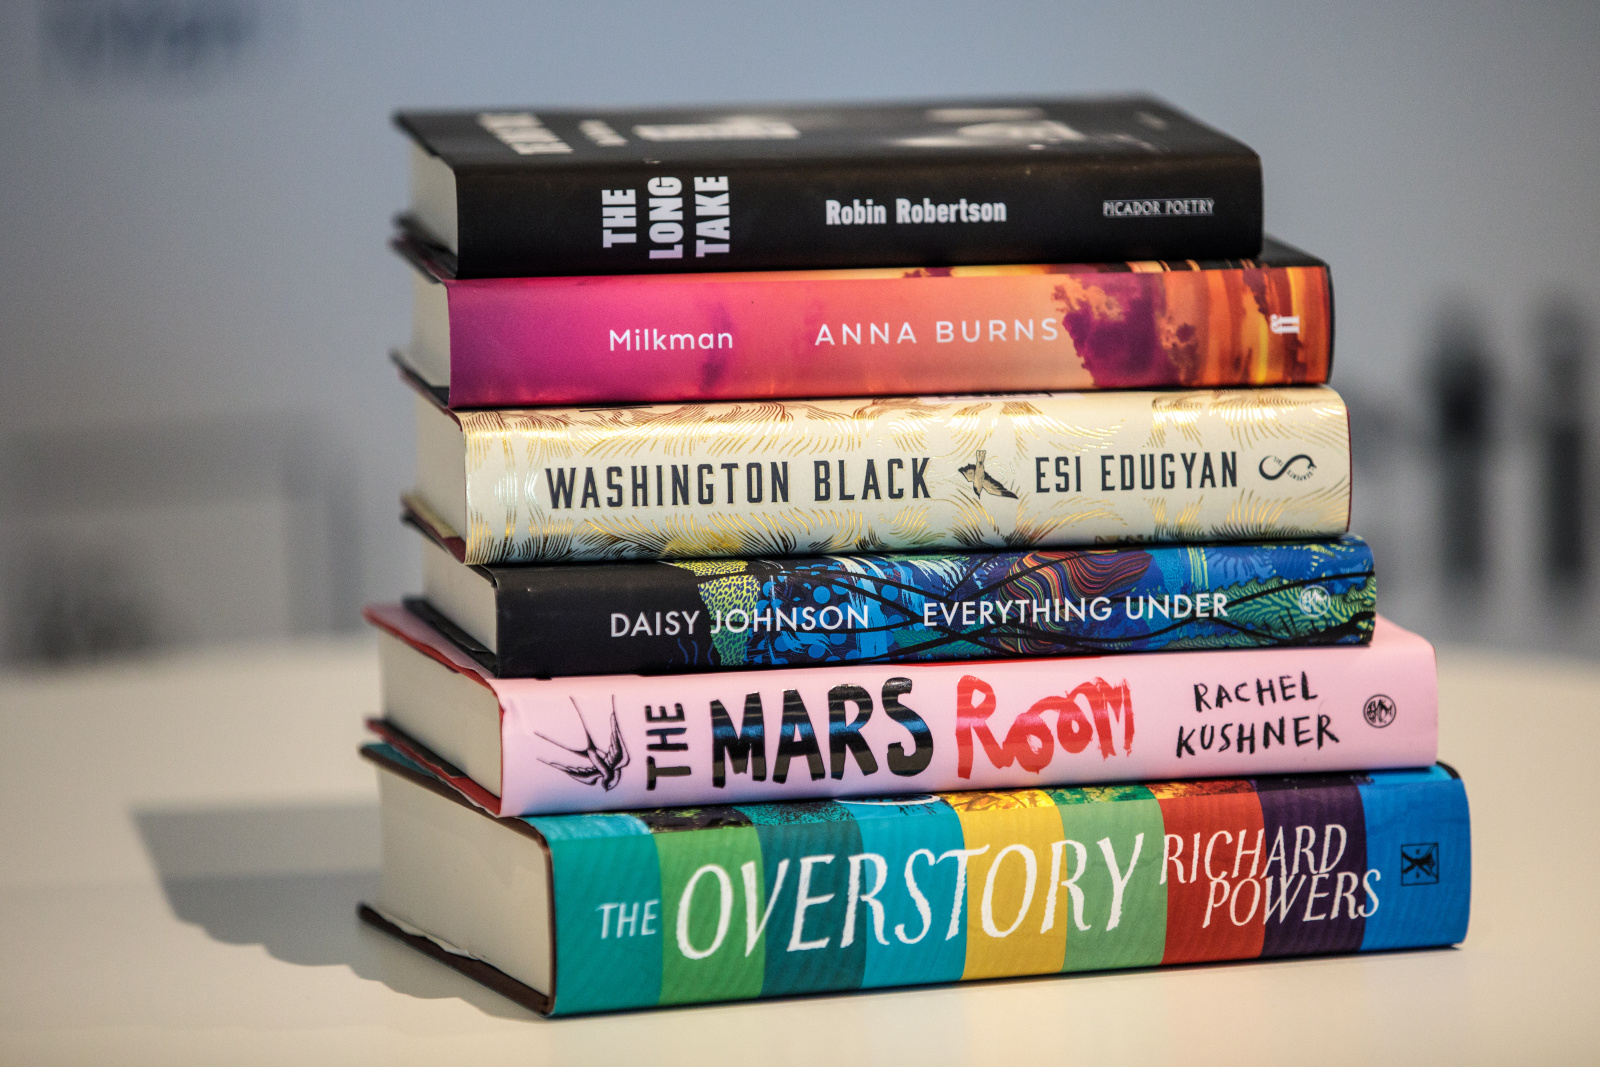 A stack of books includes The Long Take, Milkman, Washington Black, Everything Under, The Mars Room, and The Overstory.